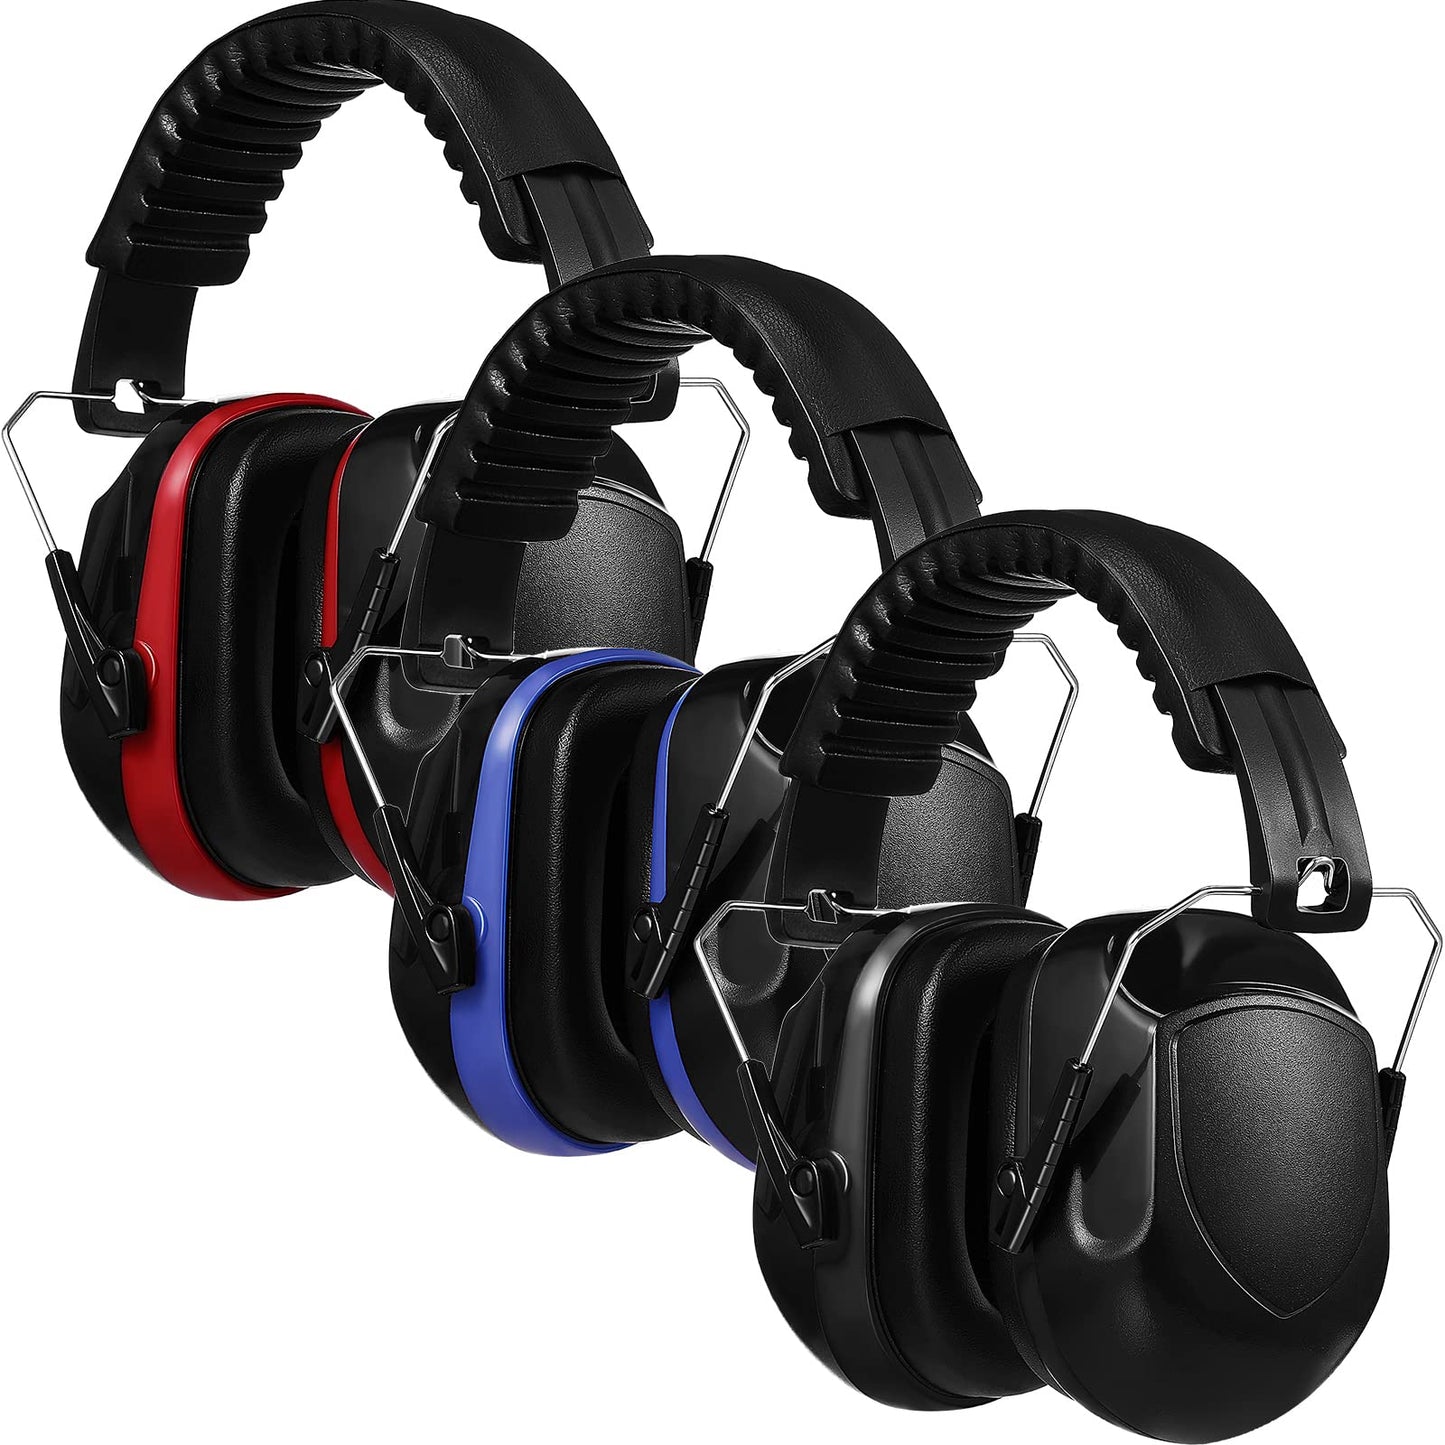 3 Pieces Noise Cancelling Ear Muffs NRR 28dB Earmuffs Hearing Protection Adjustable Ear Protection for Shooting Adults (Red, Black, Blue)